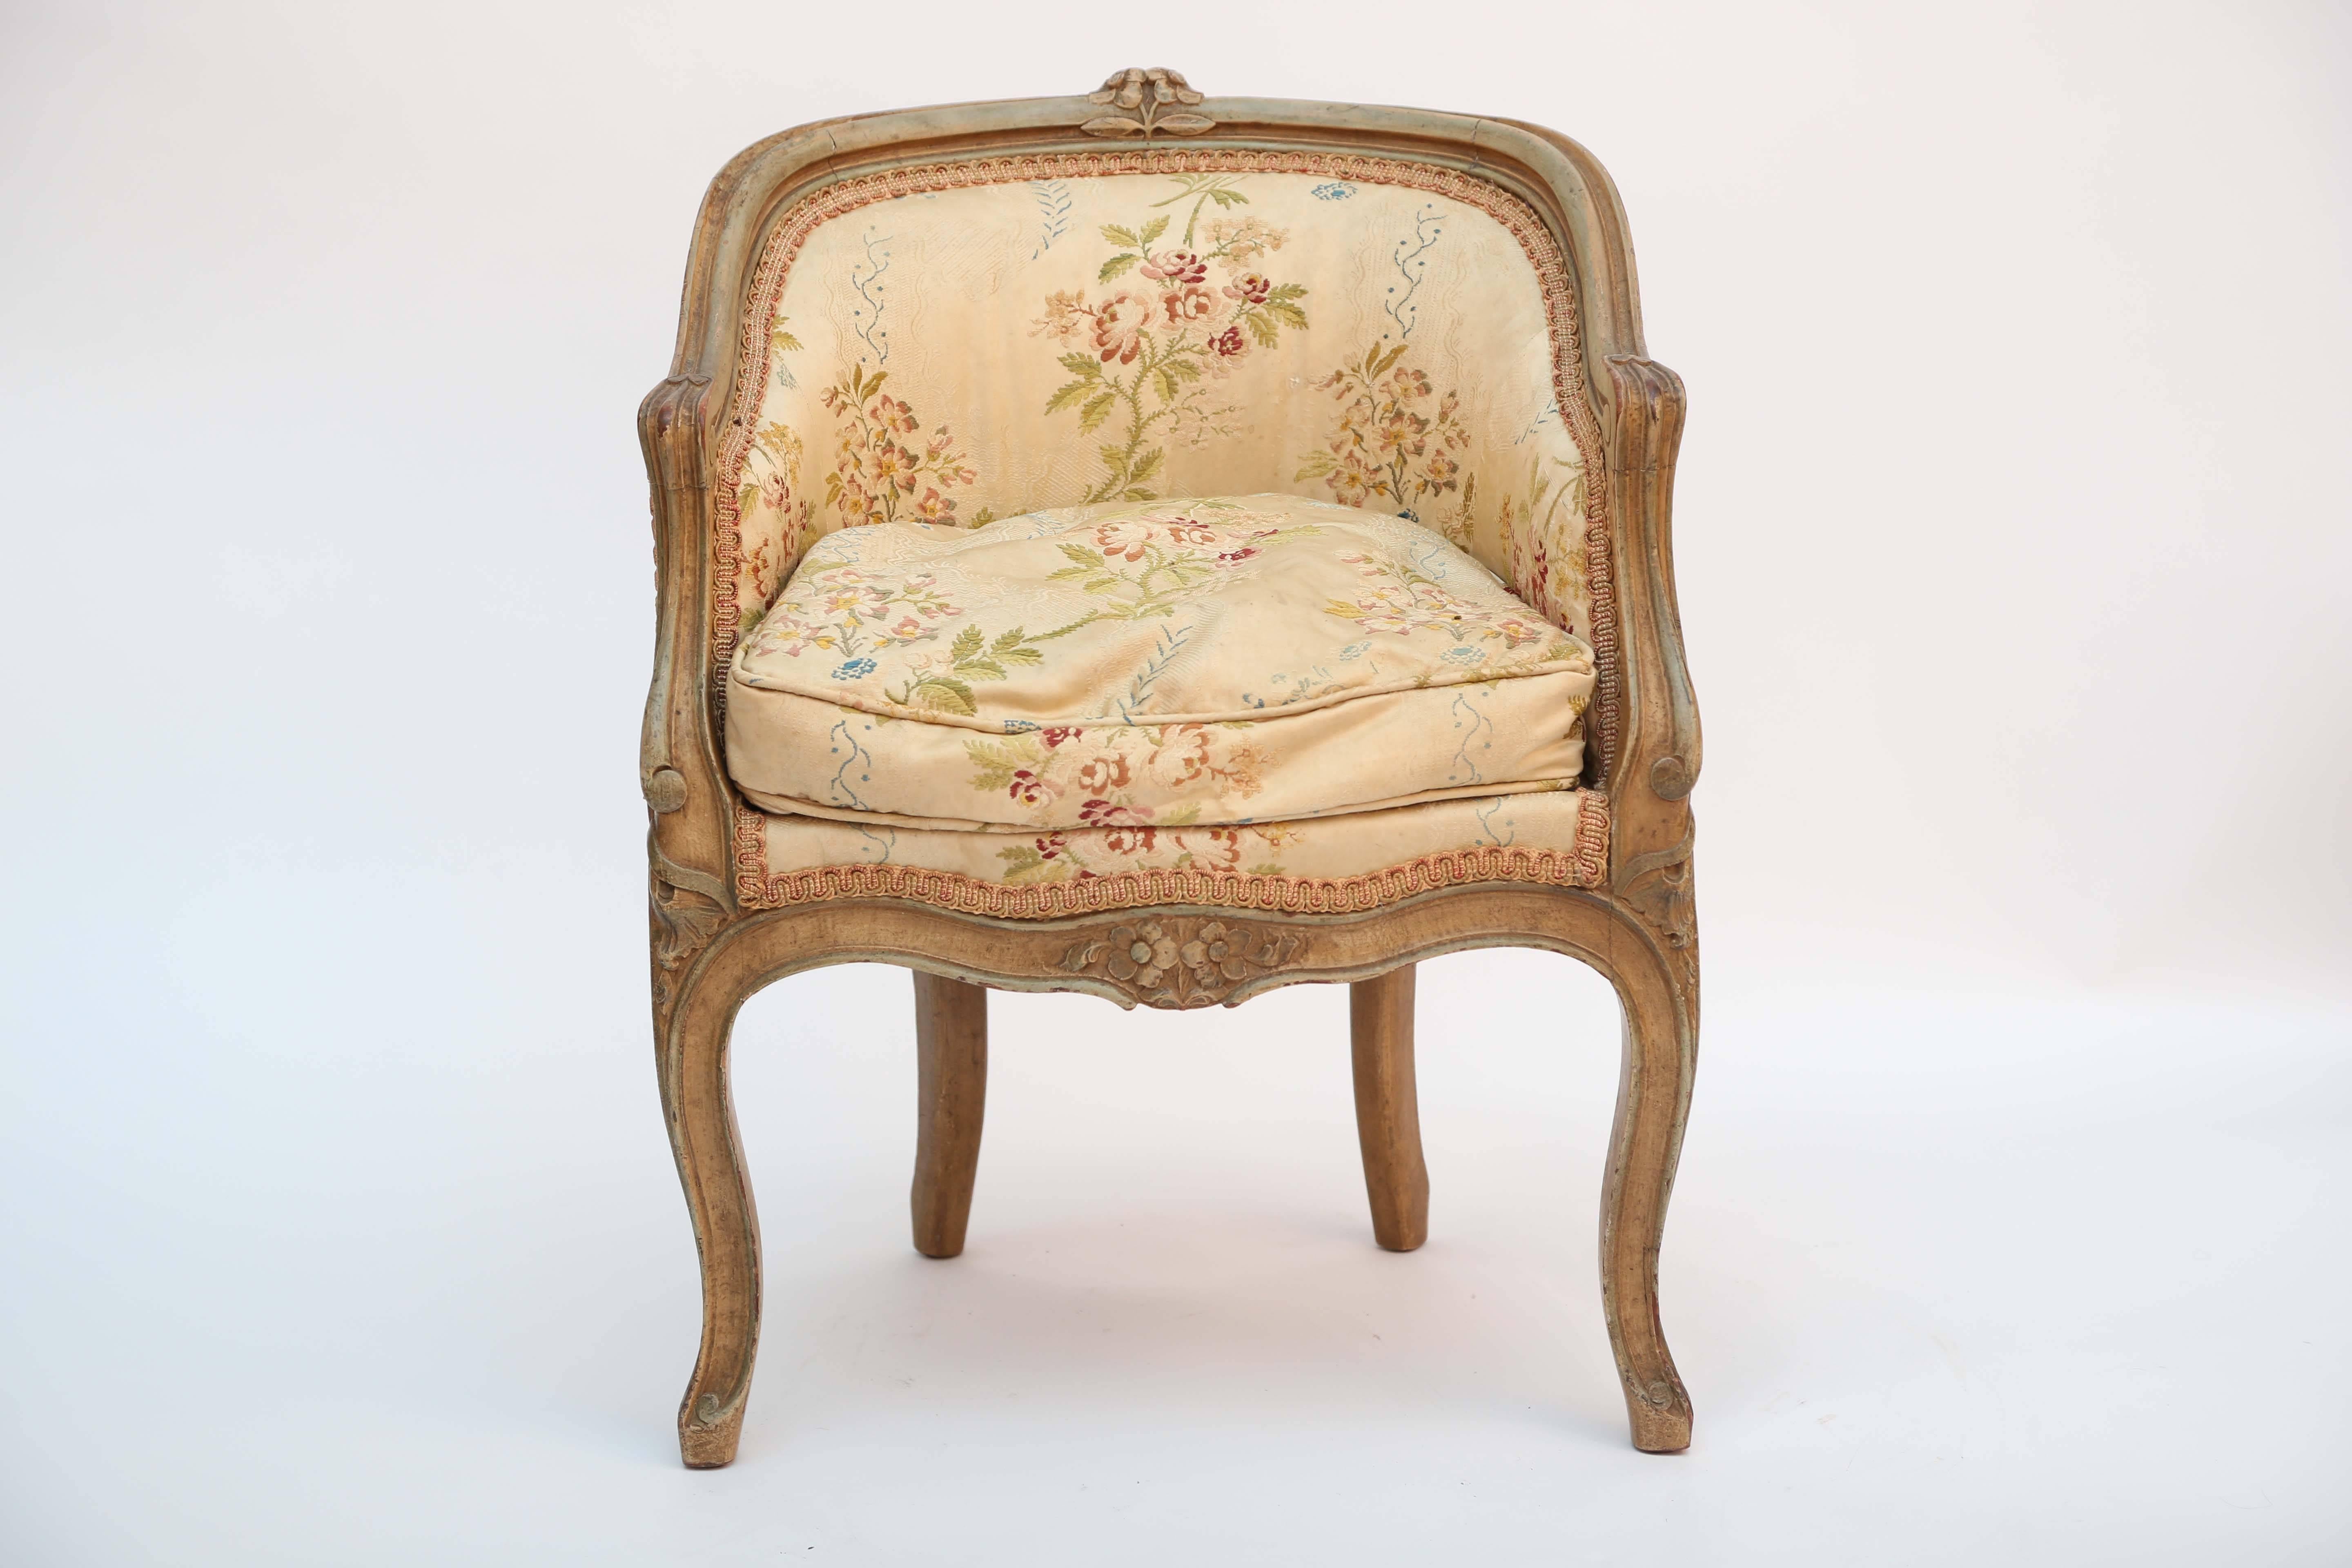 Nicely decorated with alternating colored accents and a a cane seat. A graceful 